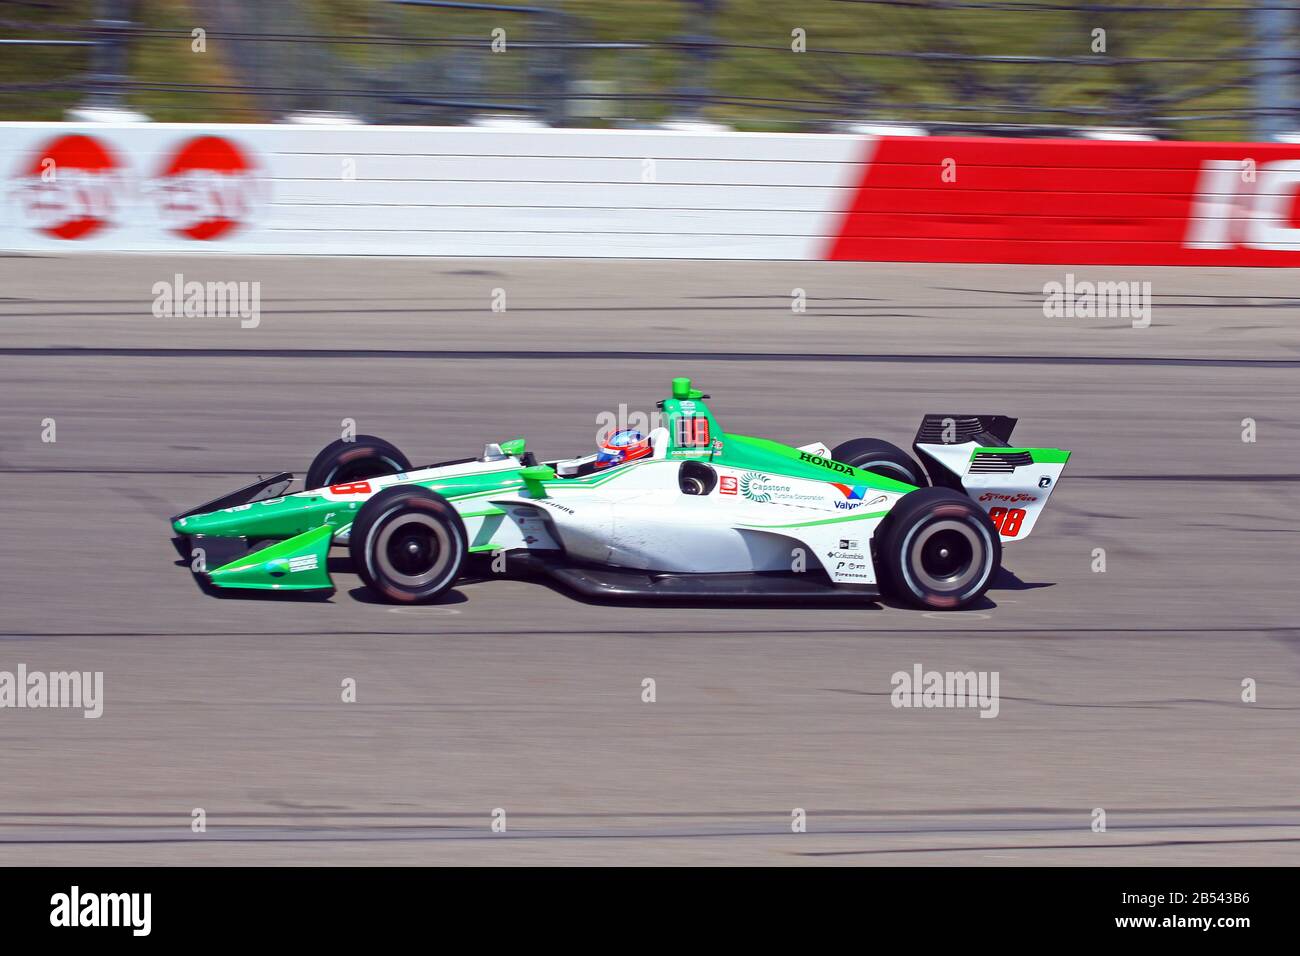 Newton Iowa, July 19, 2019: 88 Colton Herta, USA, on race track during practice session for the Iowa 300 Indycar race. Stock Photo